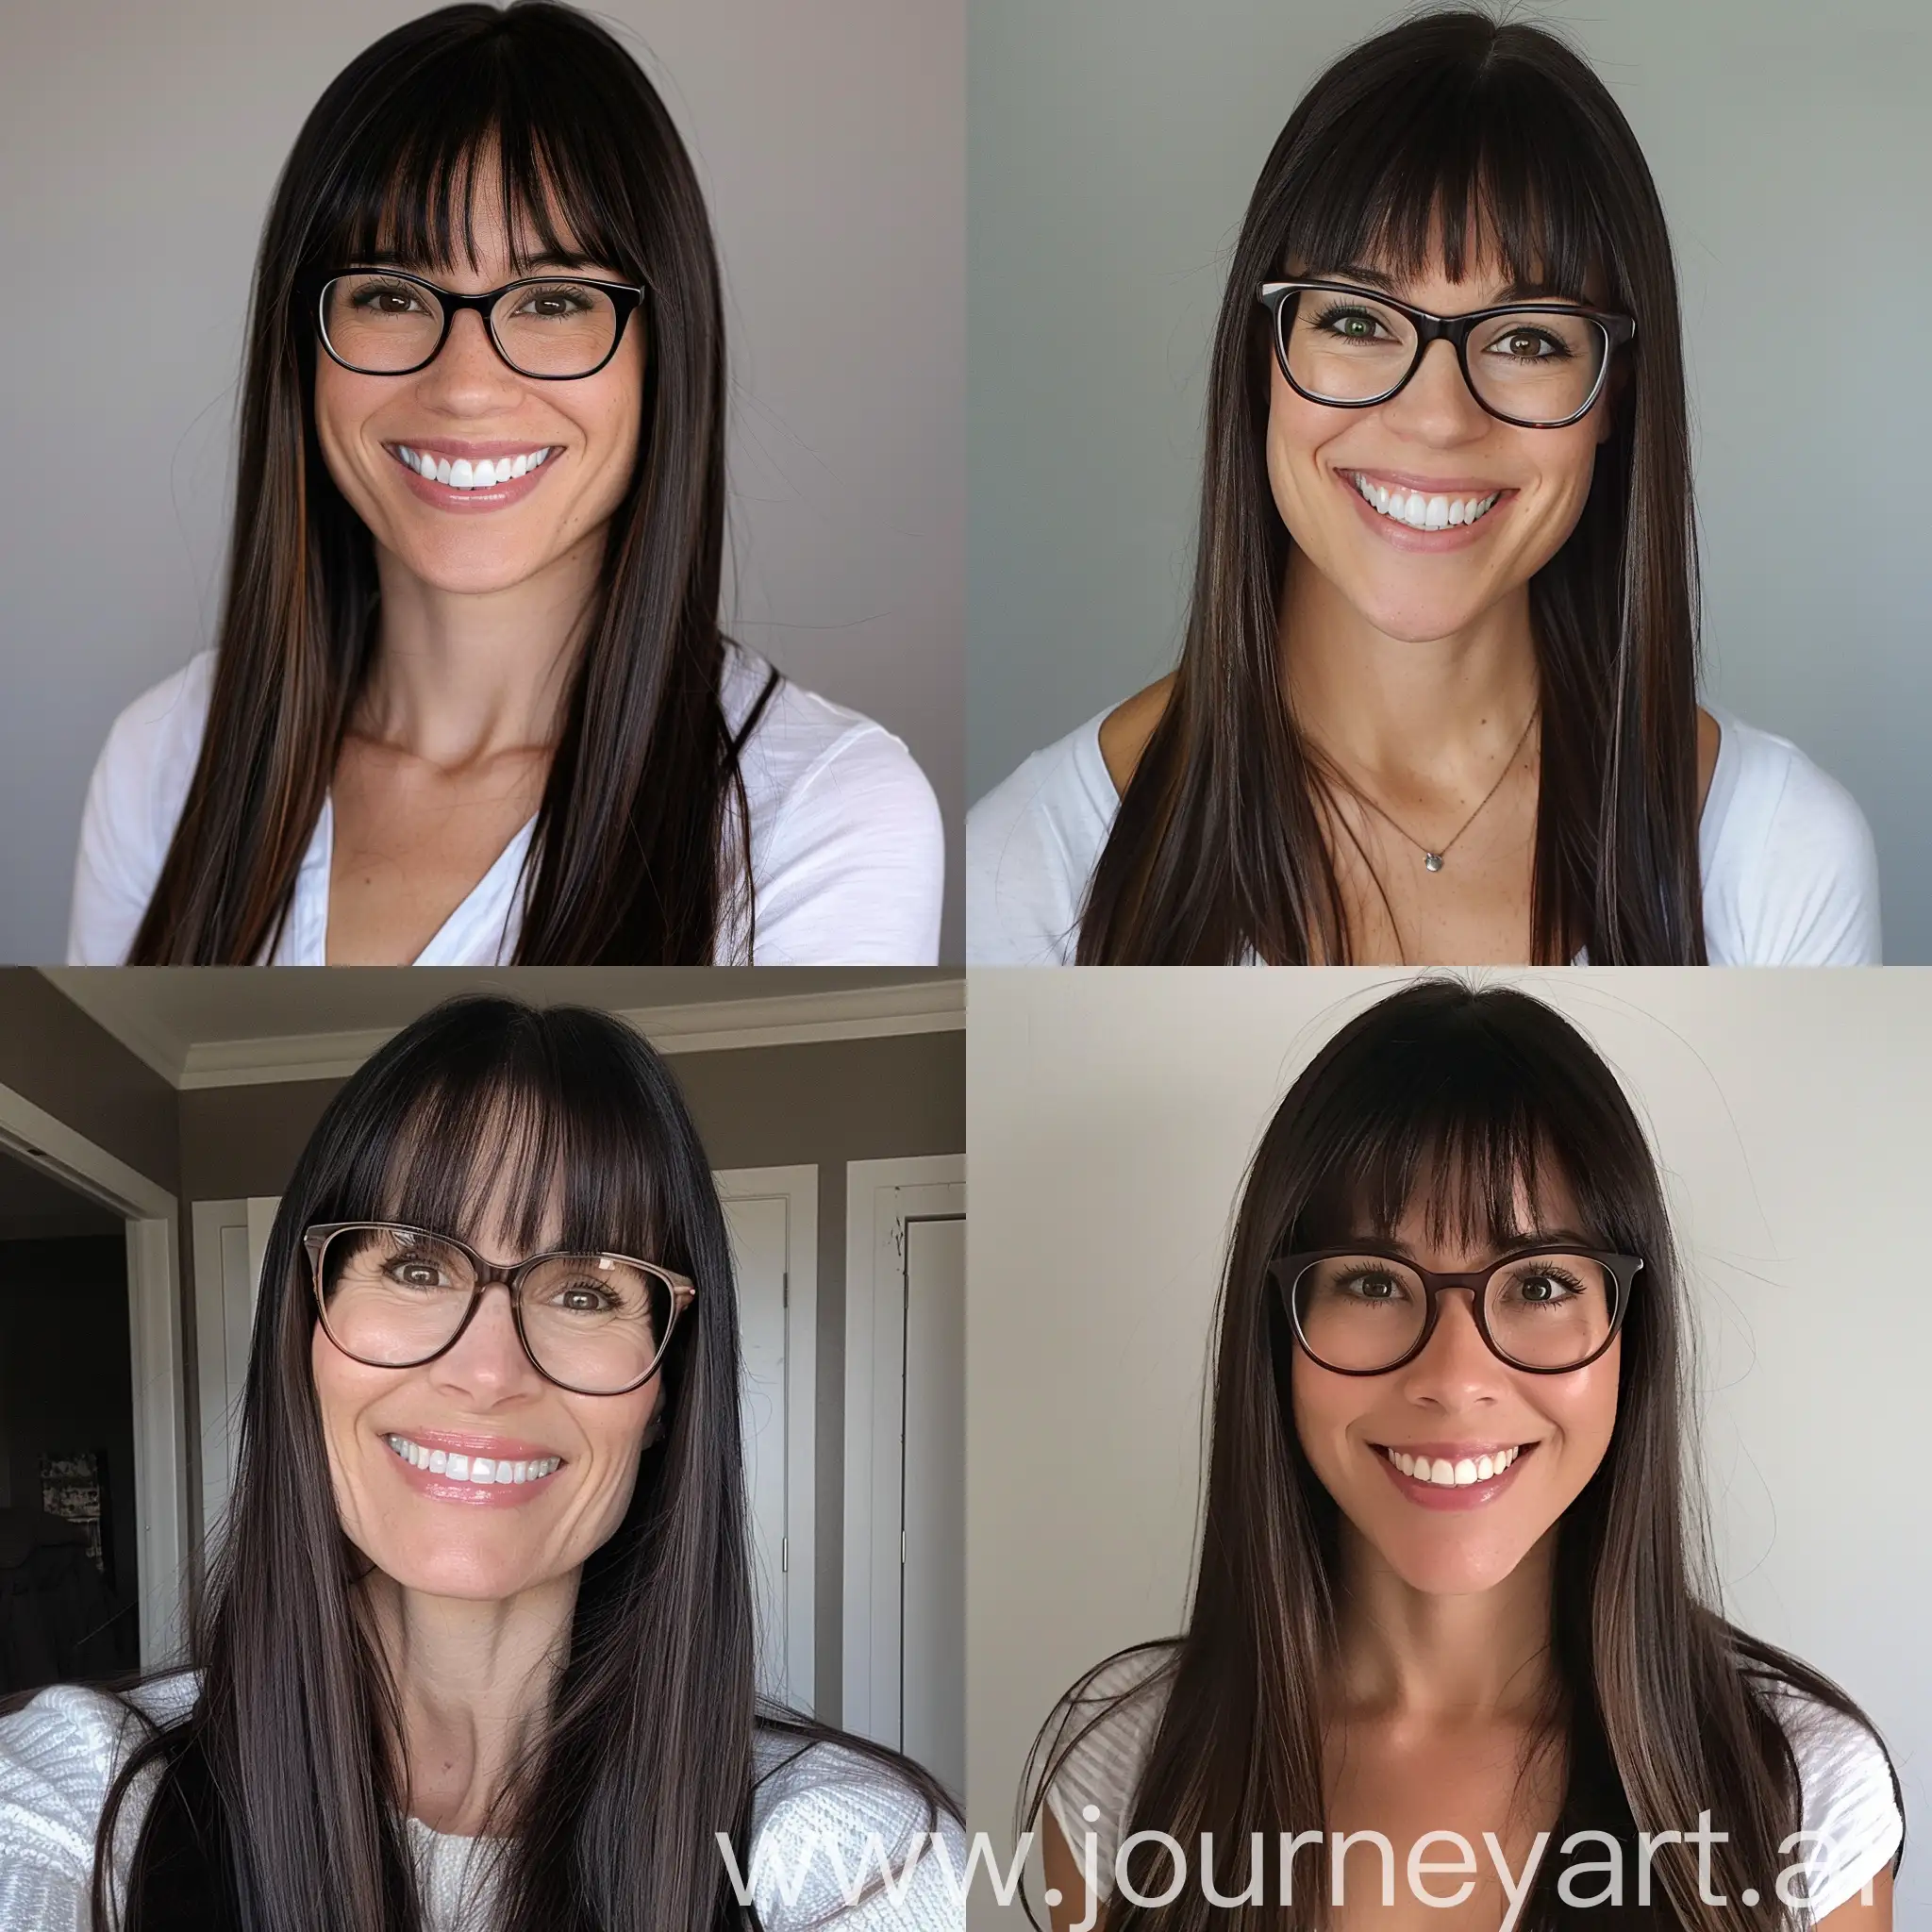 Joyful-Dark-BrownHaired-Woman-with-Glasses-Smiling-Happily